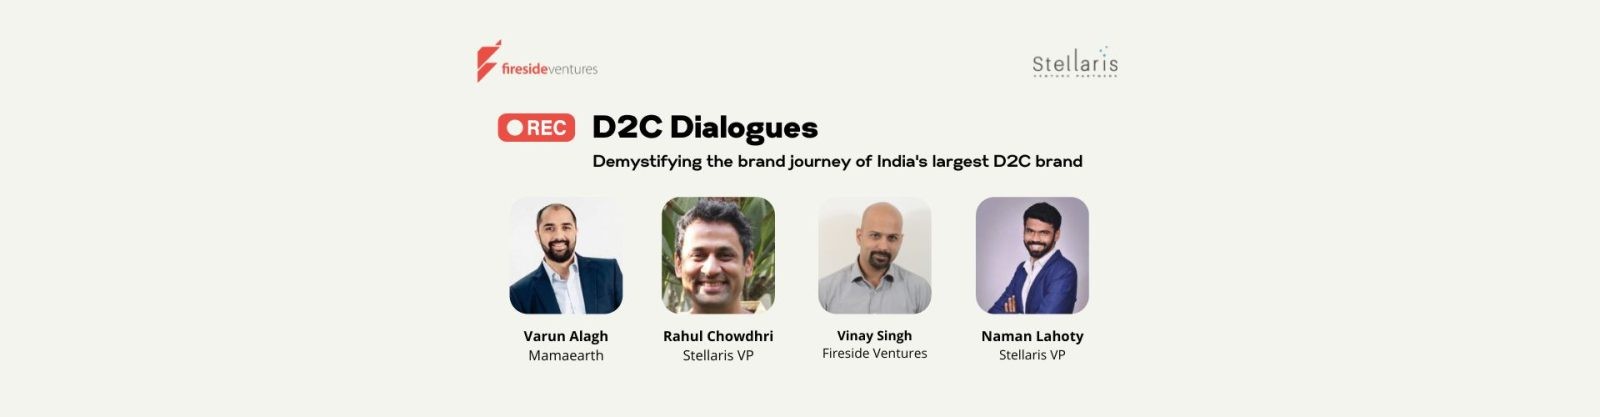 D2C Dialogues #7: Demystifying the brand journey of India’s largest D2C brand